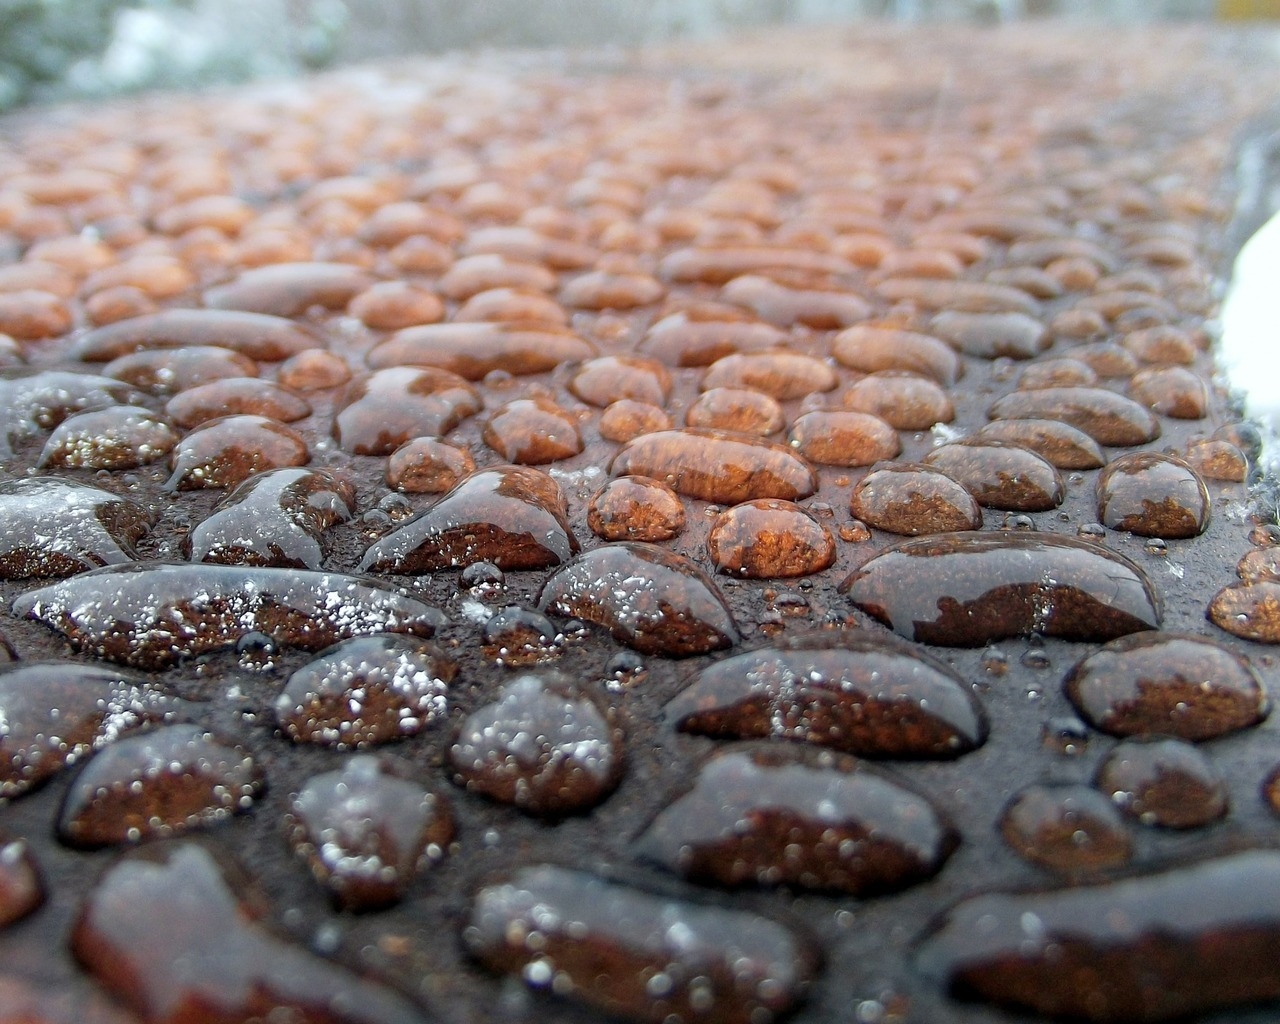 Rain Water Droplets for 1280 x 1024 resolution